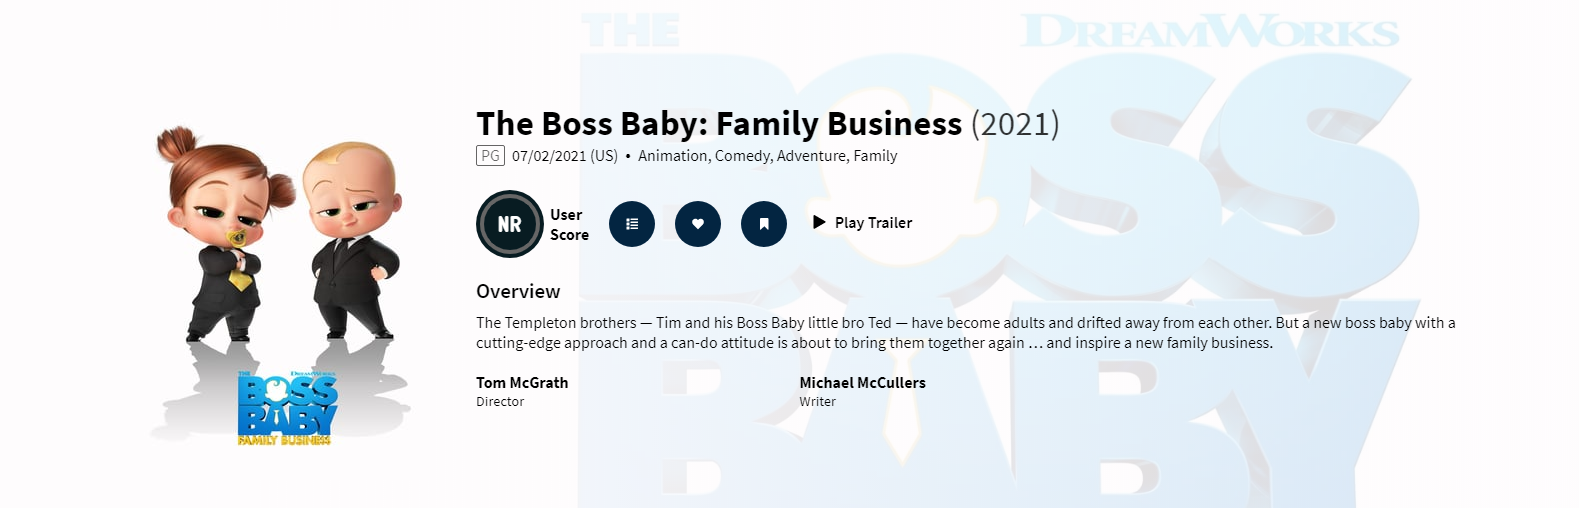 The Boss Baby Family Business ss.png